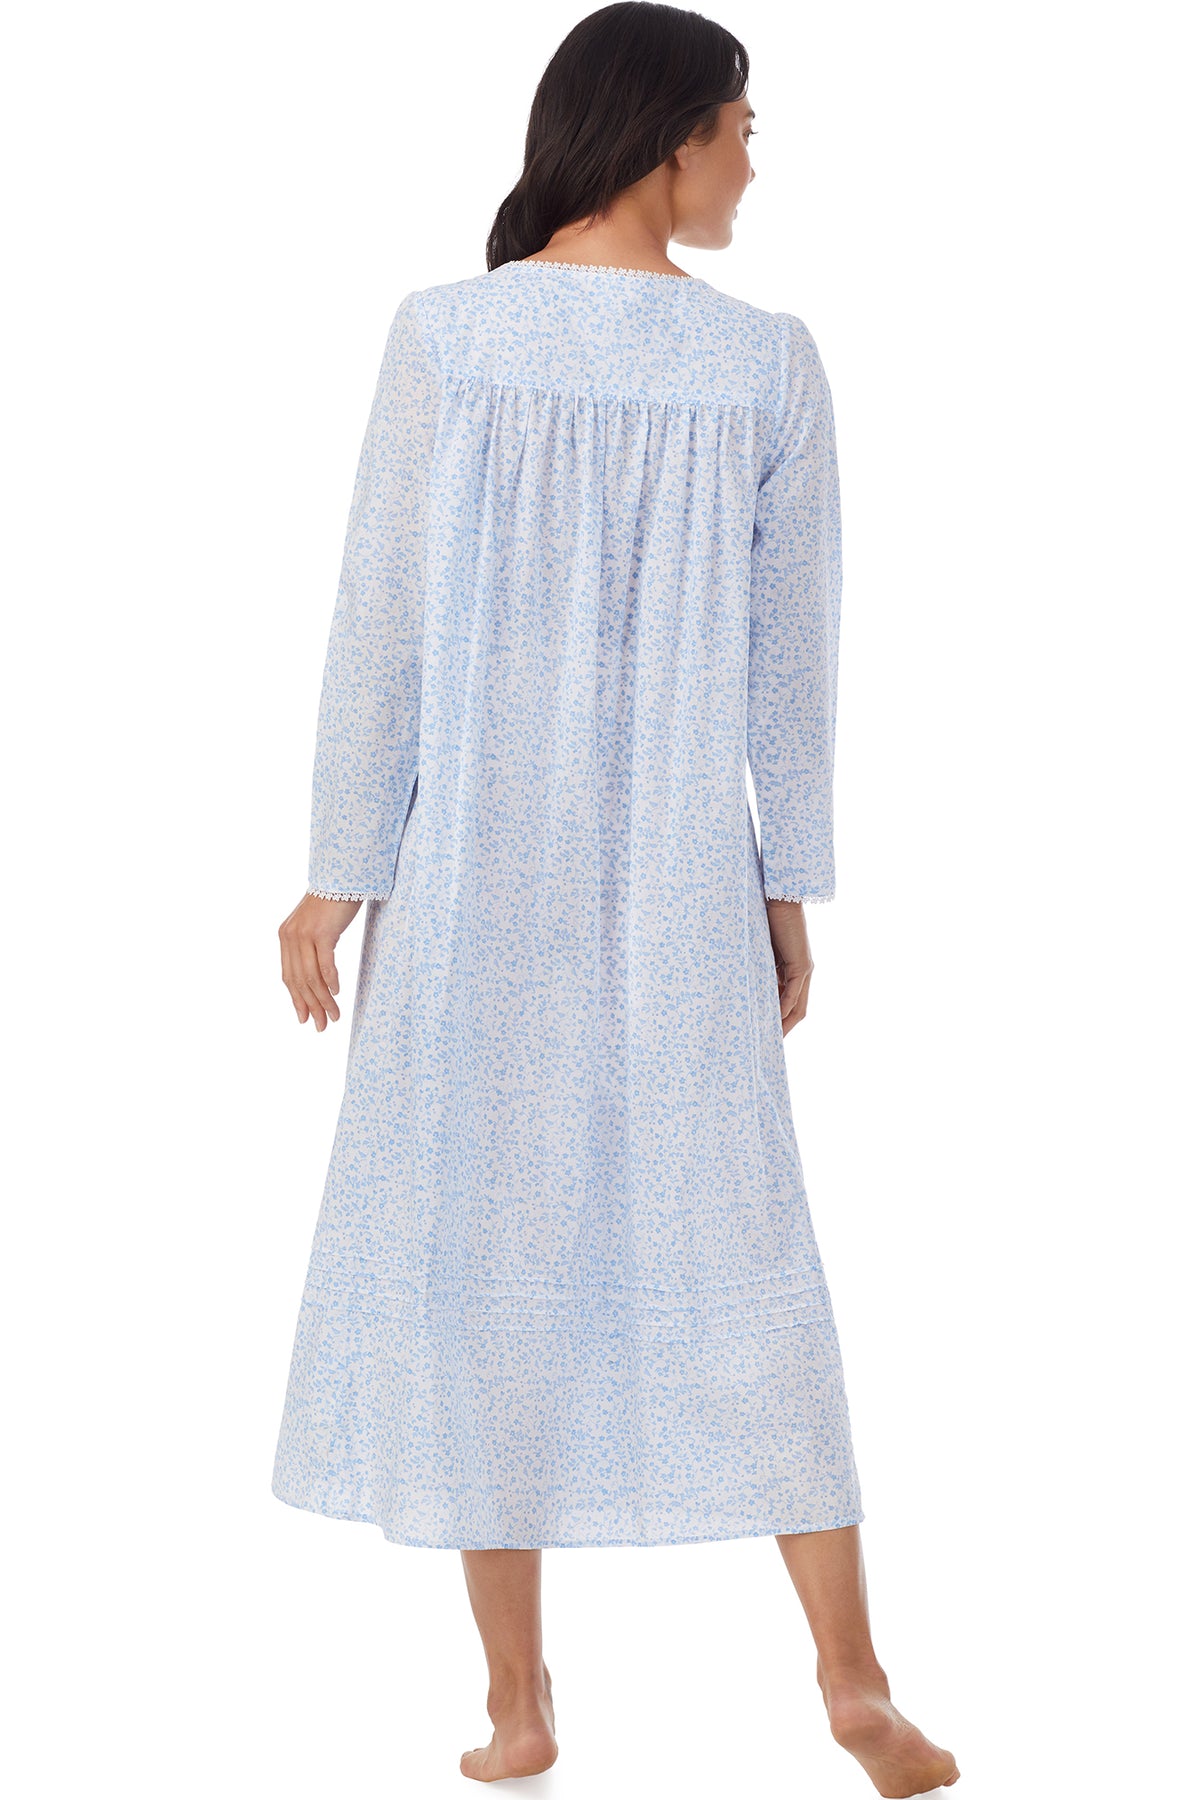 A lady wearing white long sleeve nightgown with blue floral design